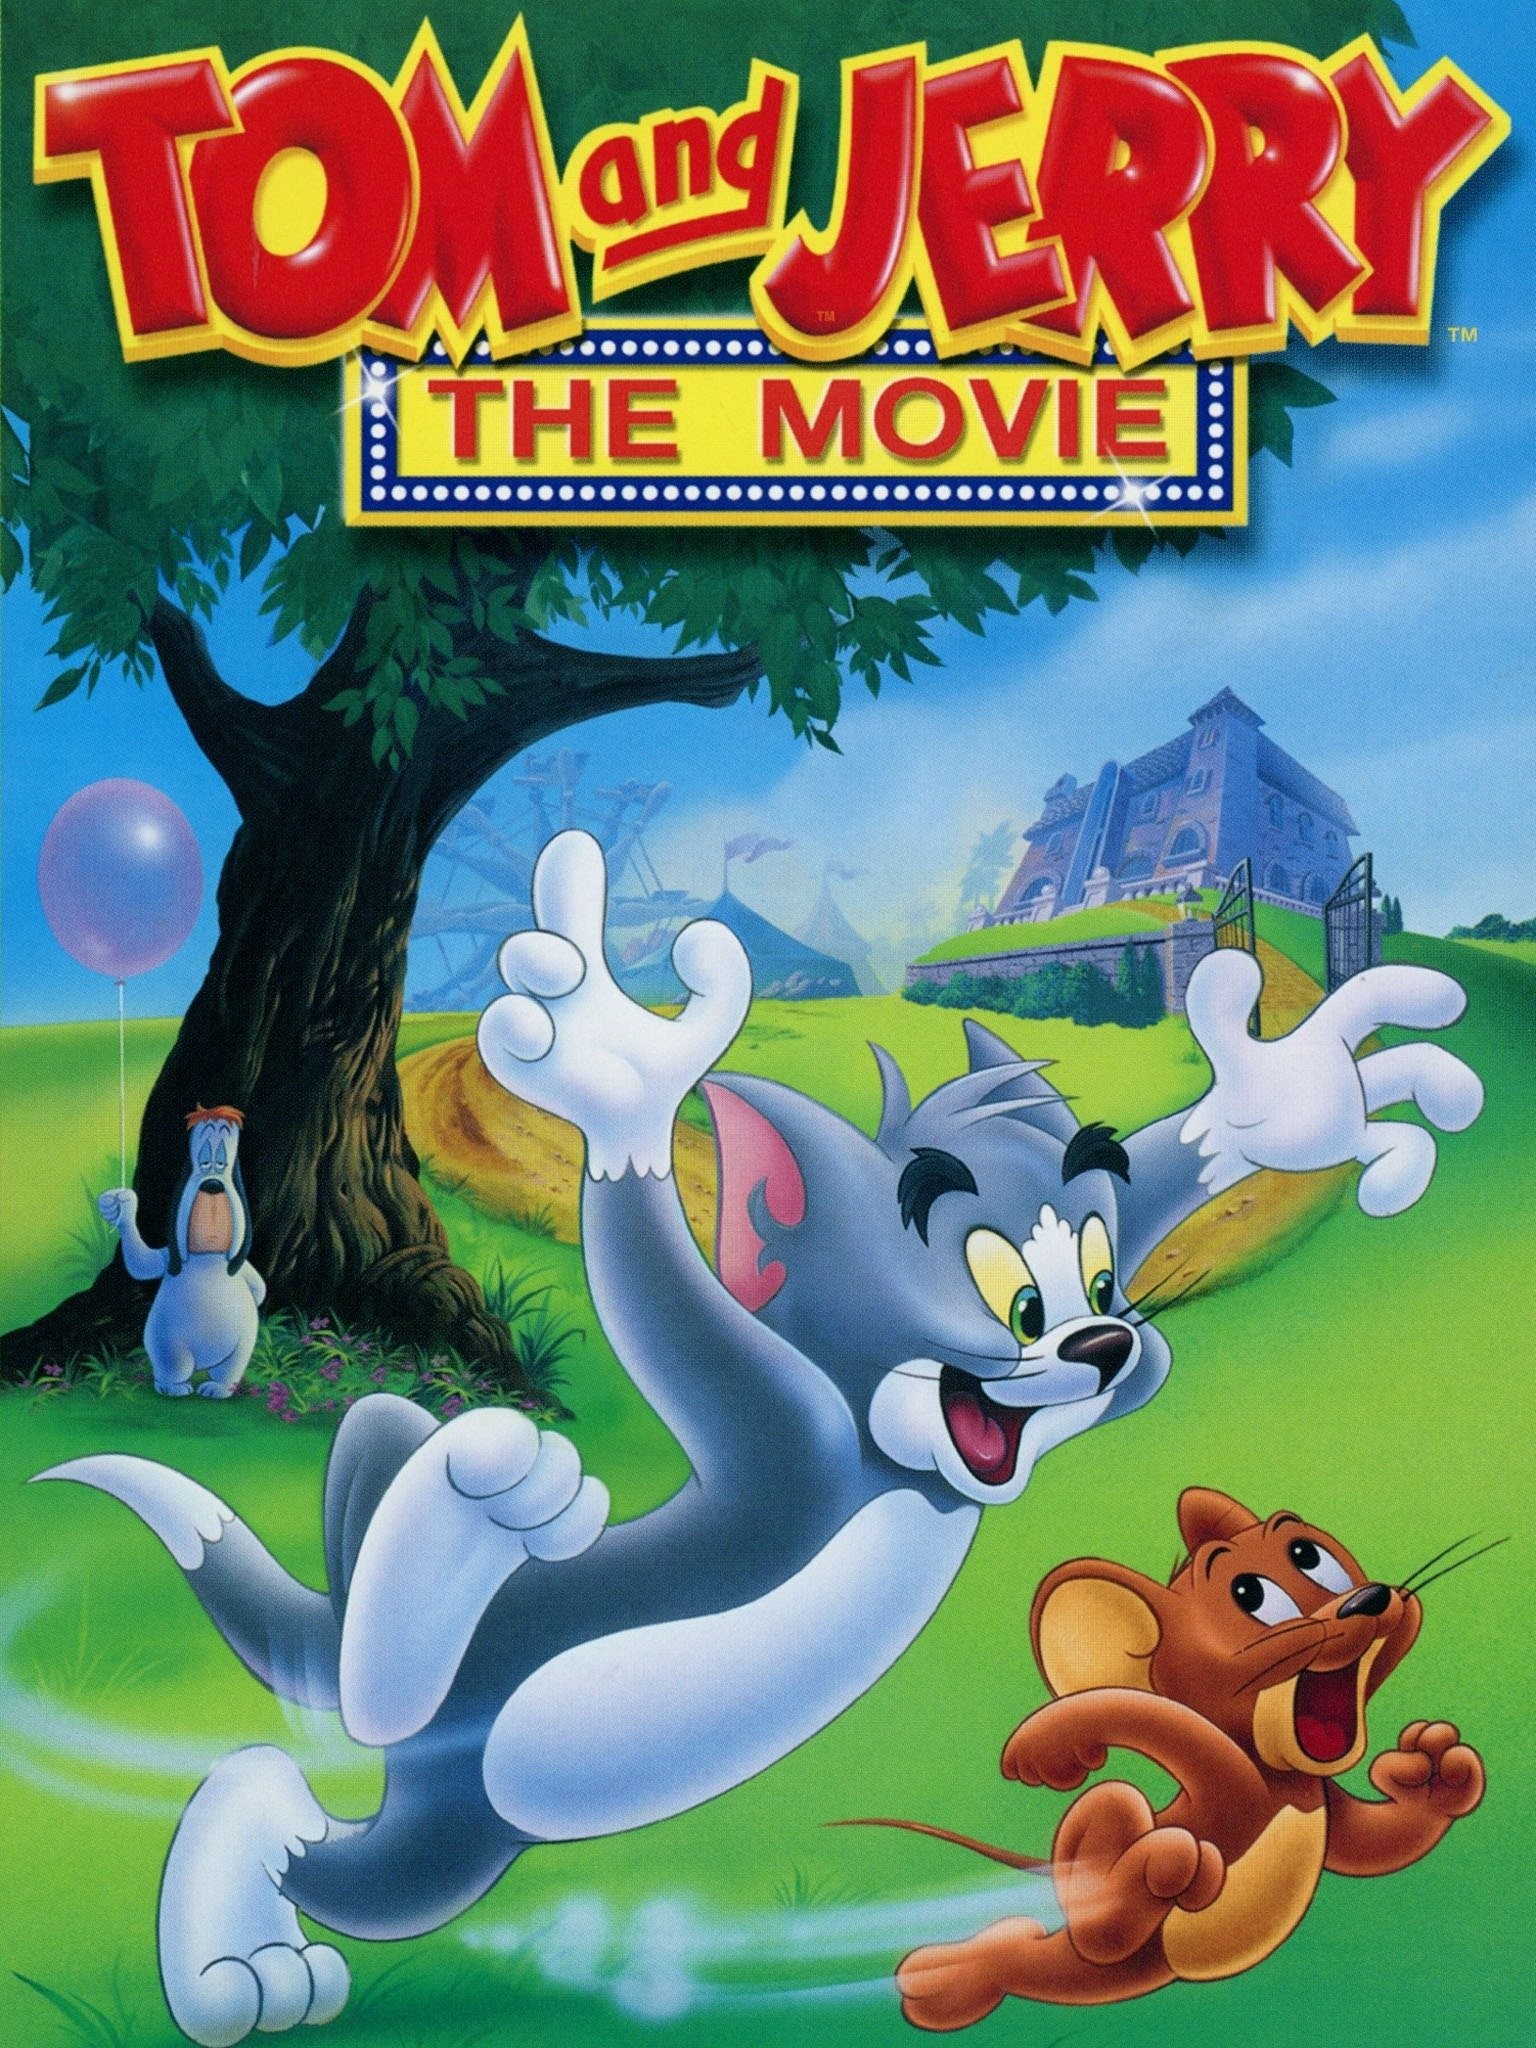 Film Review: 'Tom & Jerry' Fails to Capture What Made A Classic